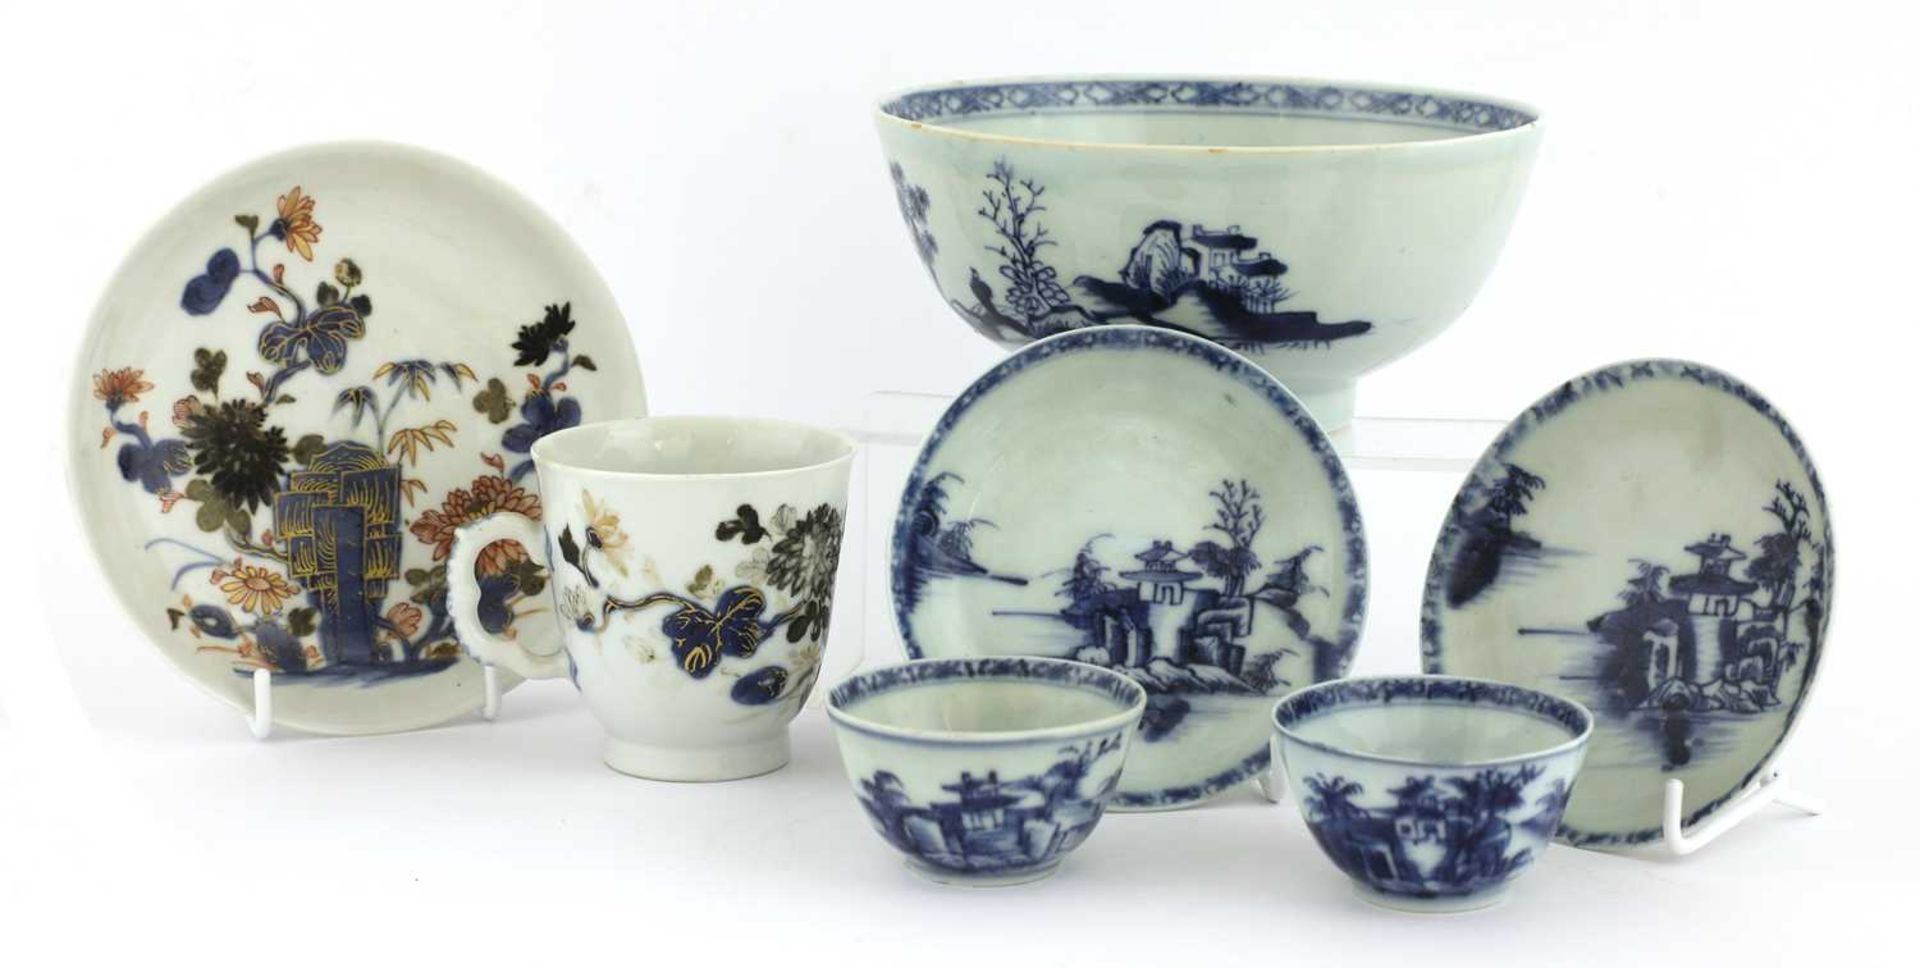 A collection of Nanking Cargo Chinese export porcelain,